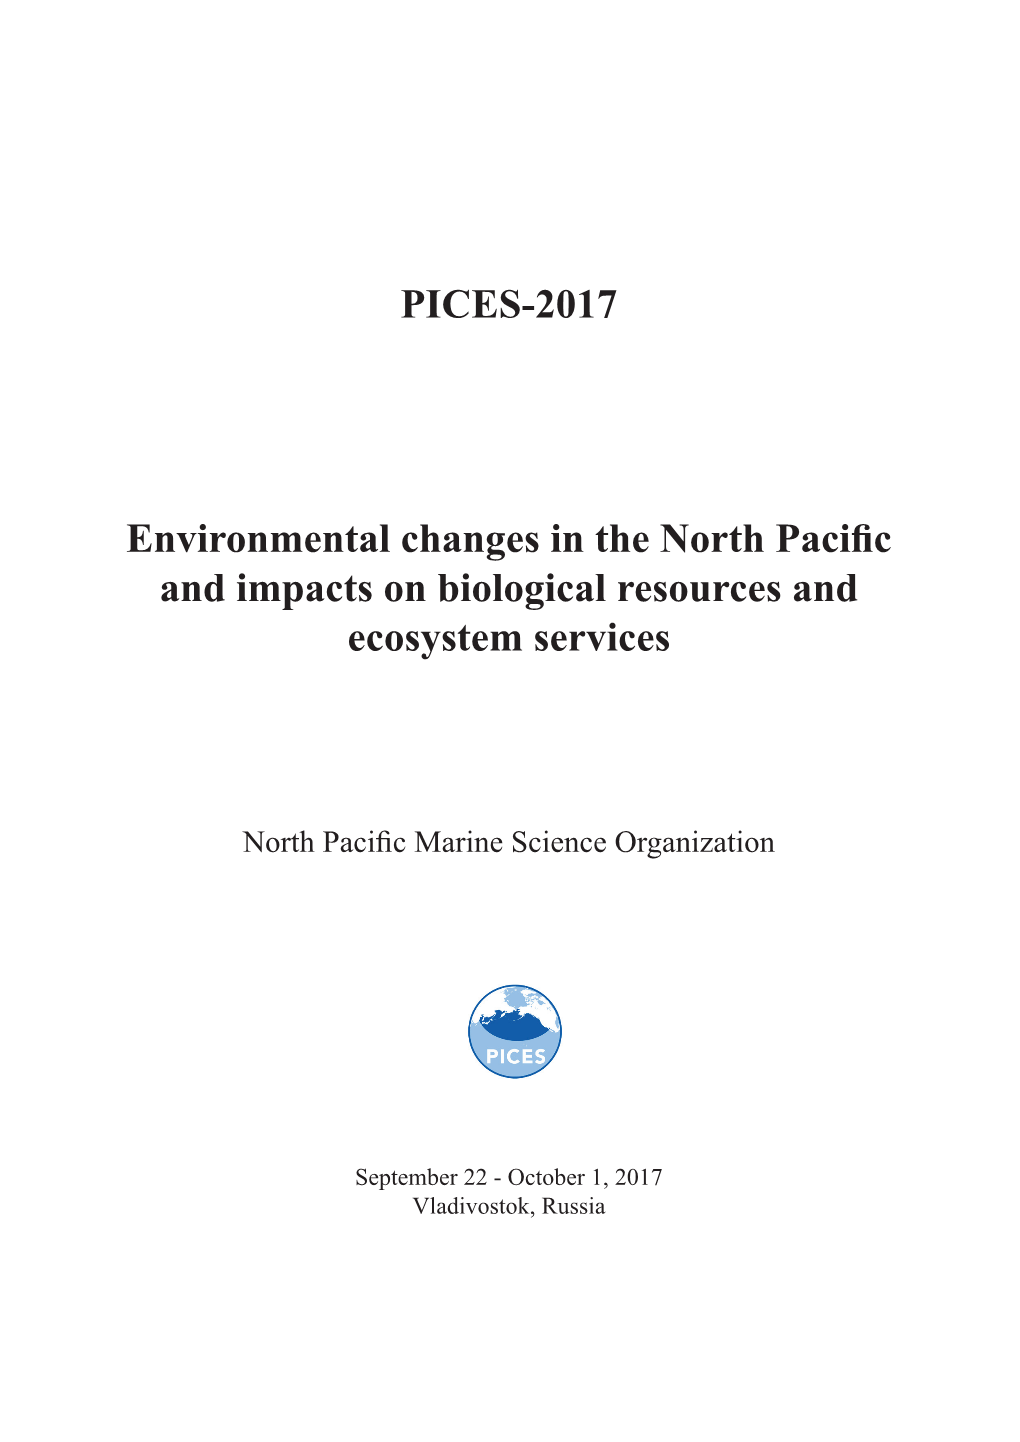 PICES-2017 Environmental Changes in the North Pacific and Impacts On